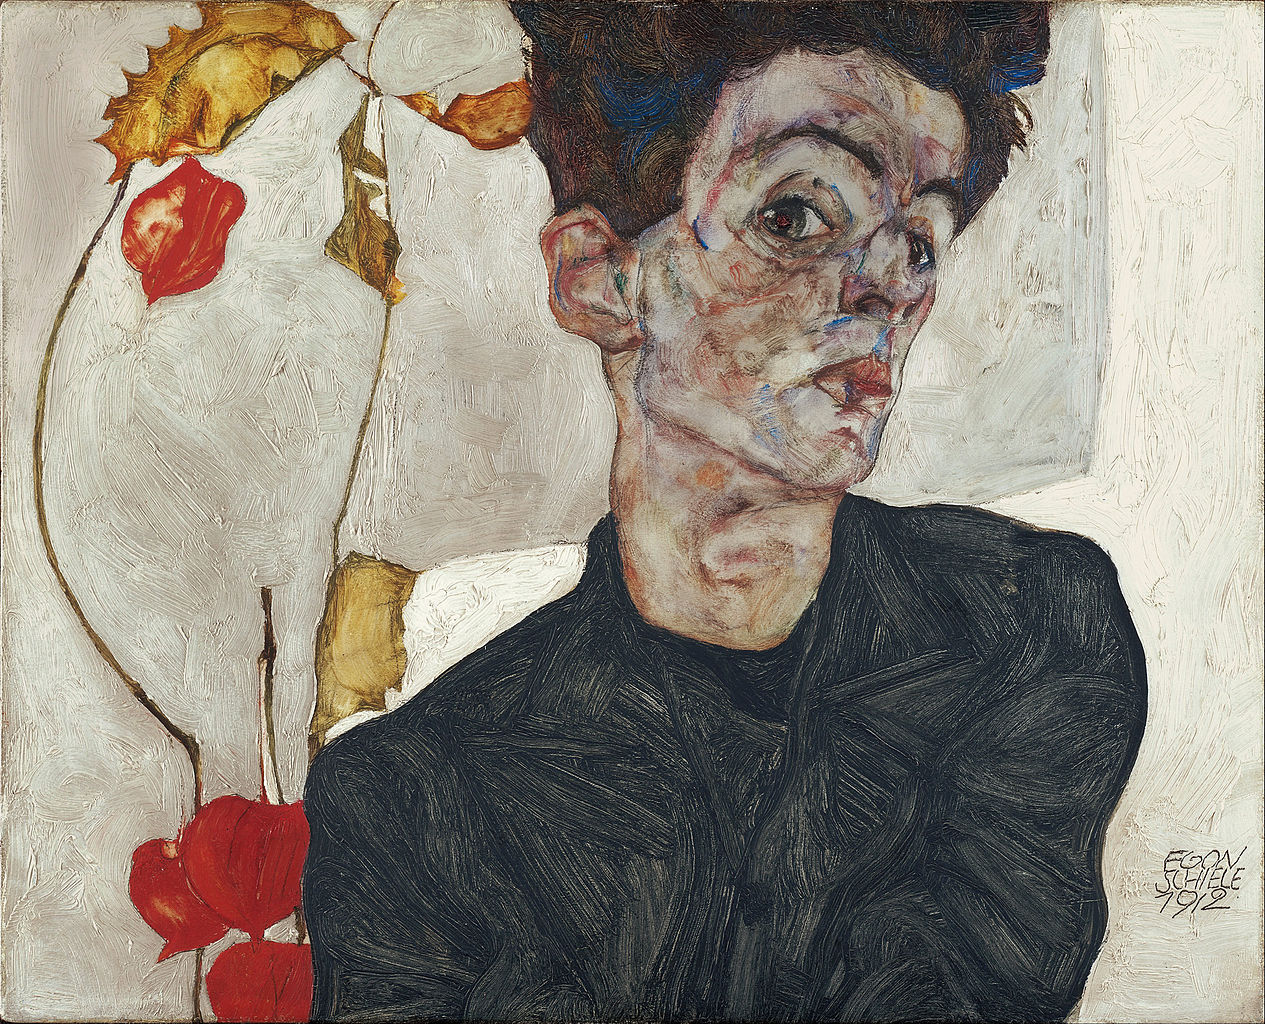 Self-portrait with Chinese Lanterns (1912) by Egon Schiele. As reproduced in 30,000 Years of Art